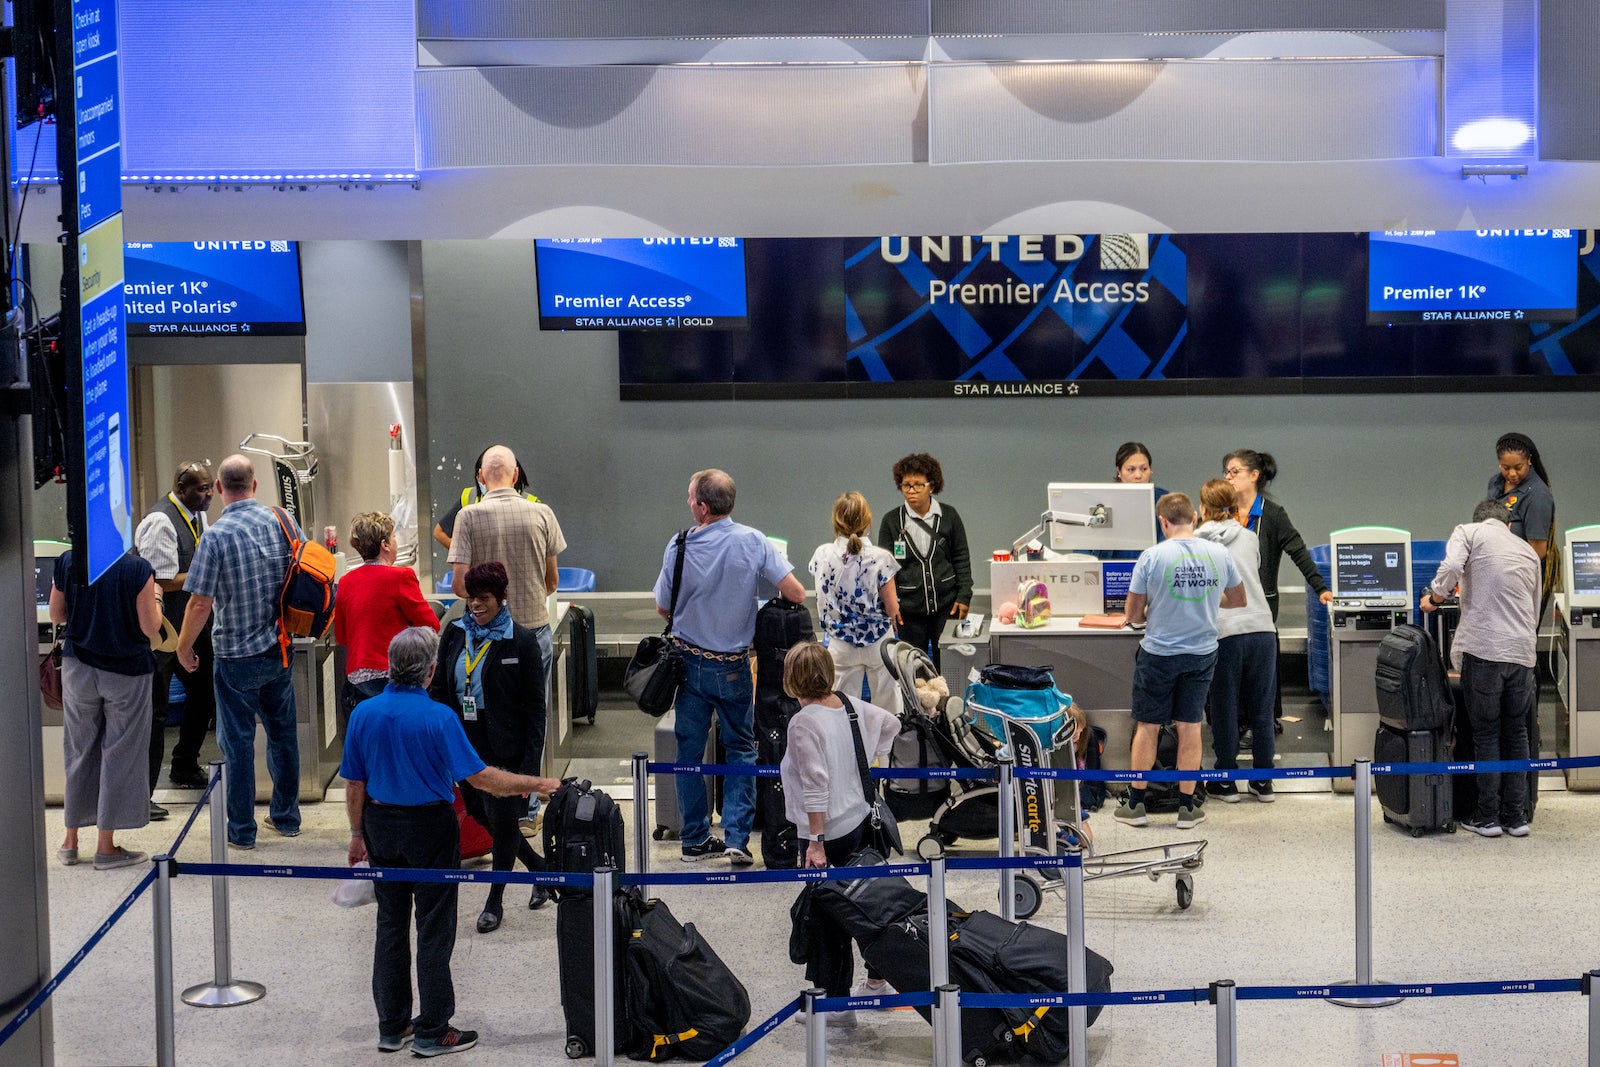 United check-in desk at airport